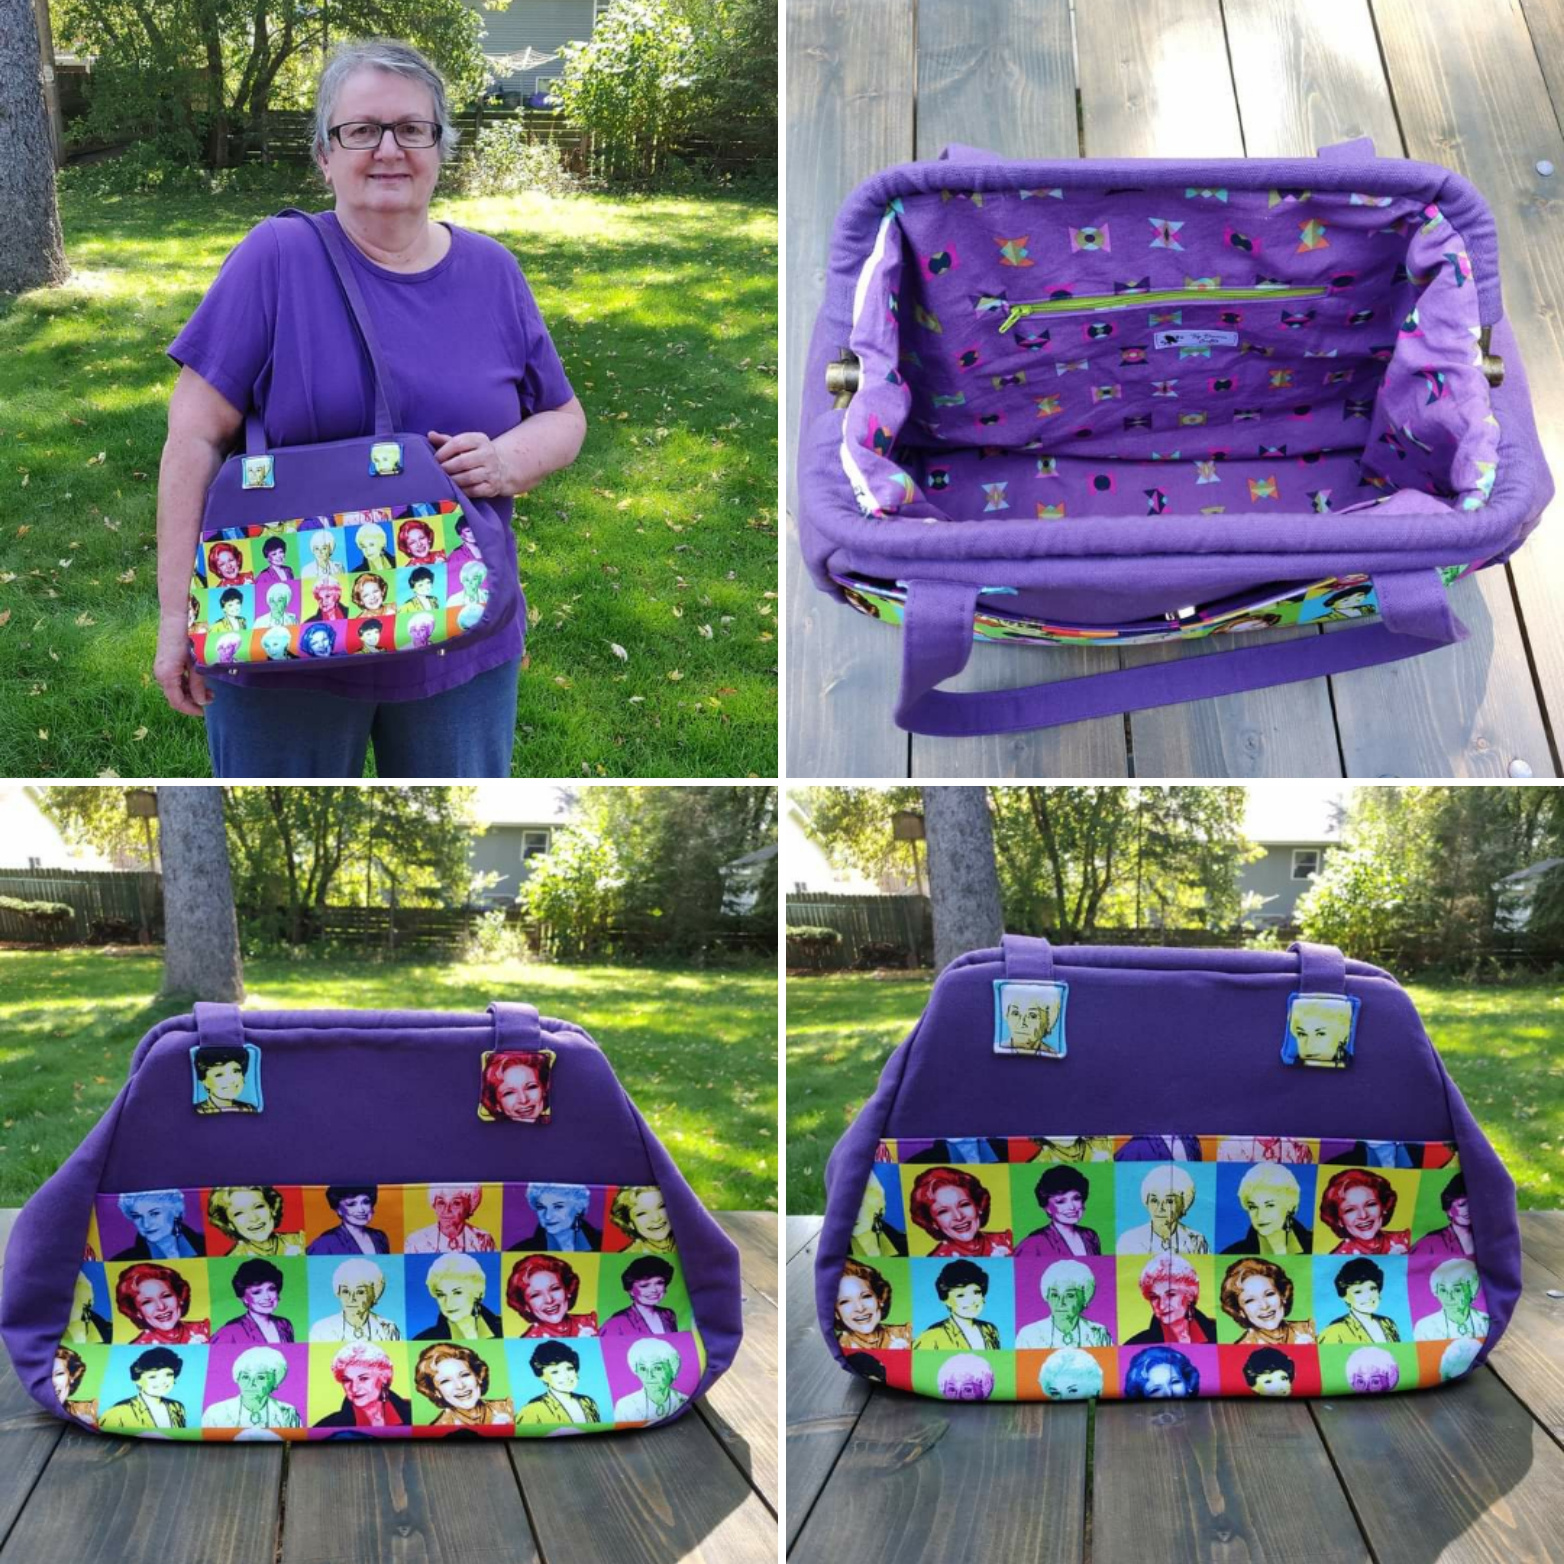 The Companion Carpet Bag, made by Mandy of Top Drawer Crafts